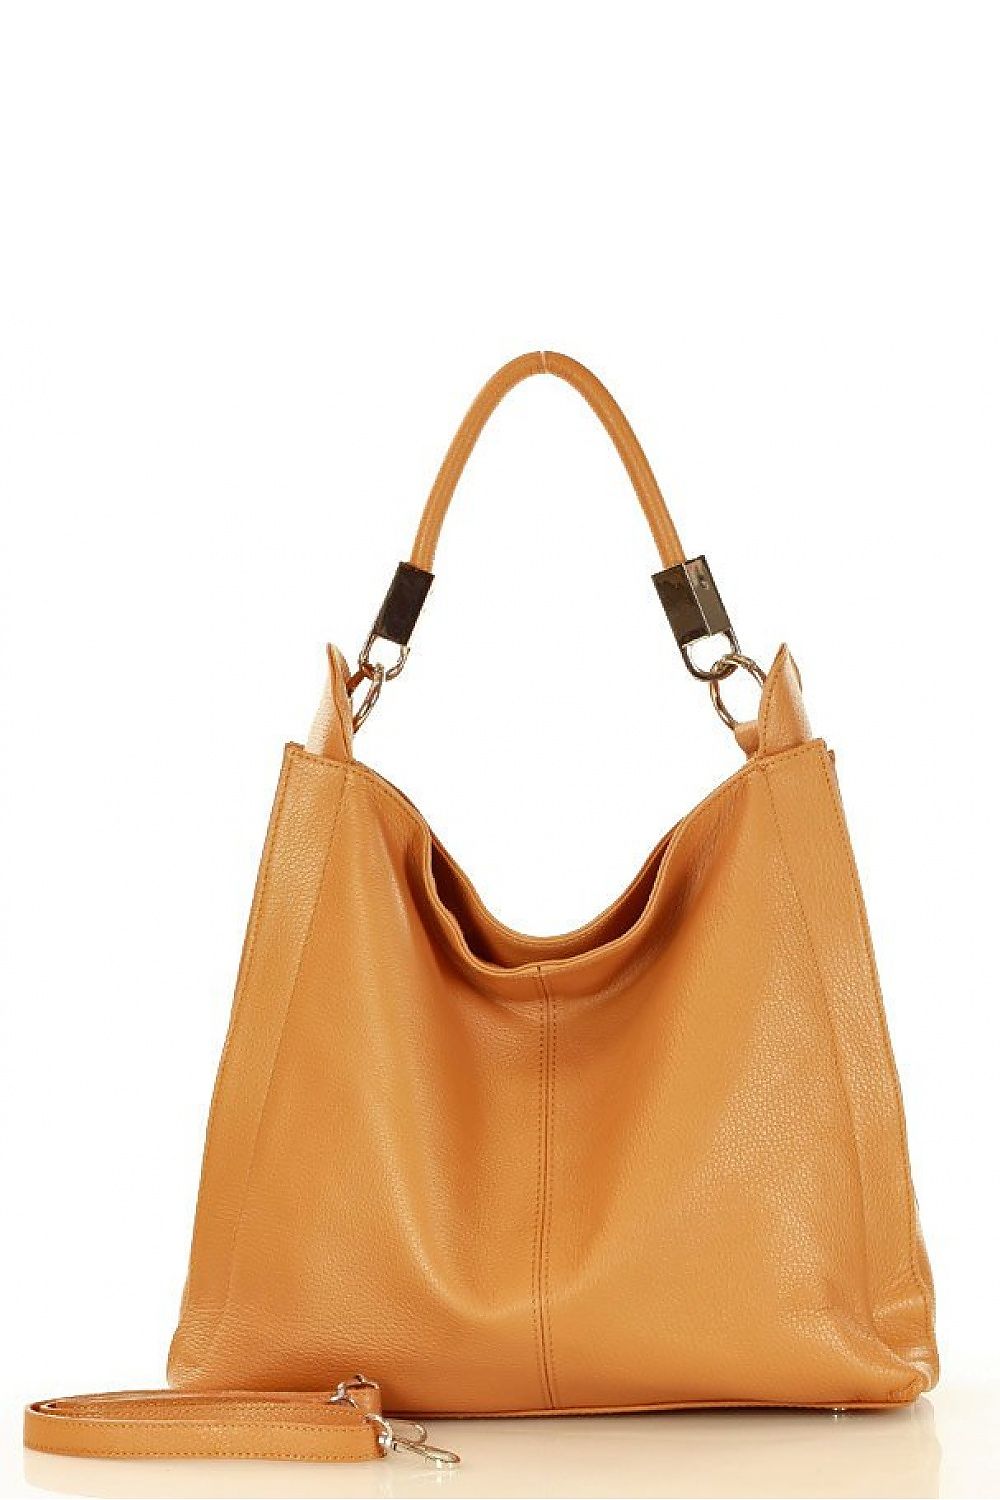 Moda West Bags & Accessories in Clothing - Walmart.com